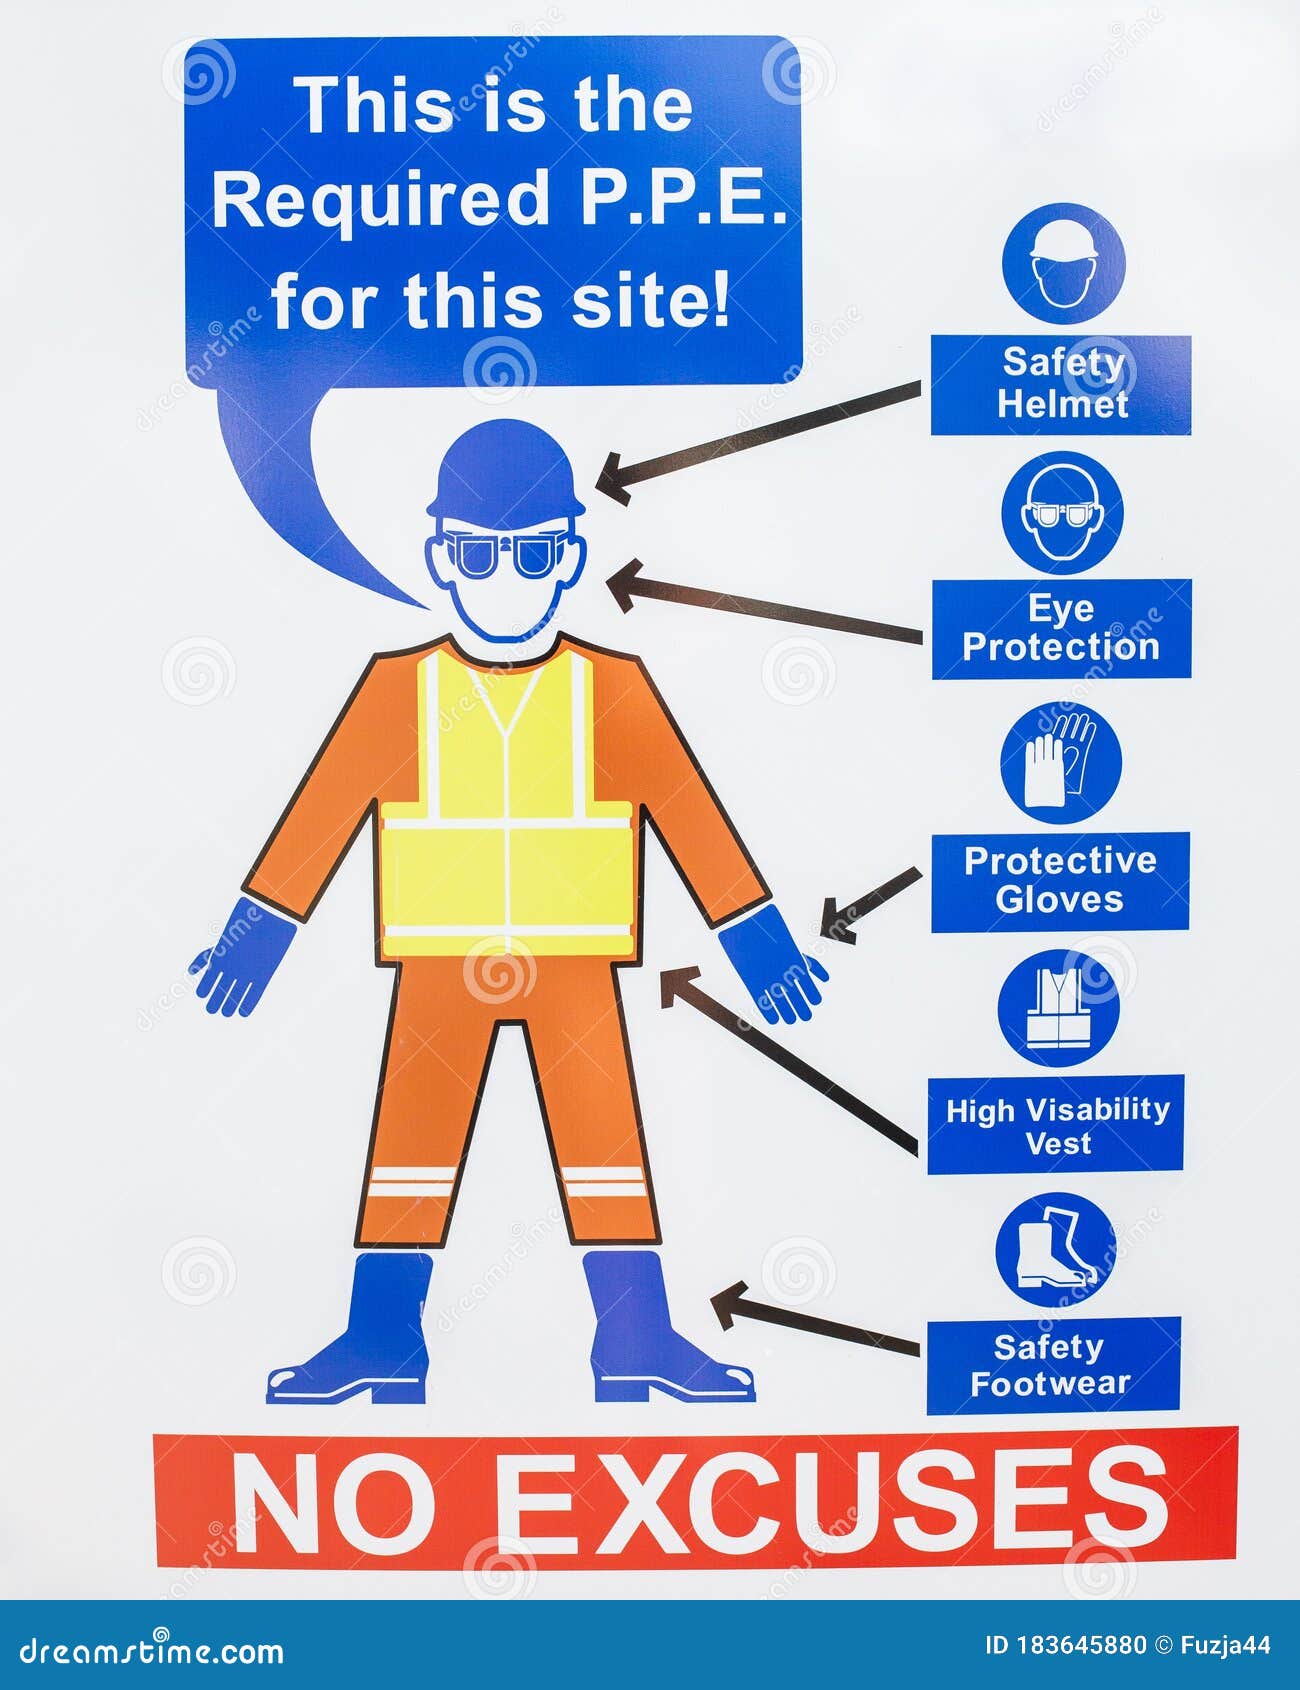 Construction Health And Safety Images